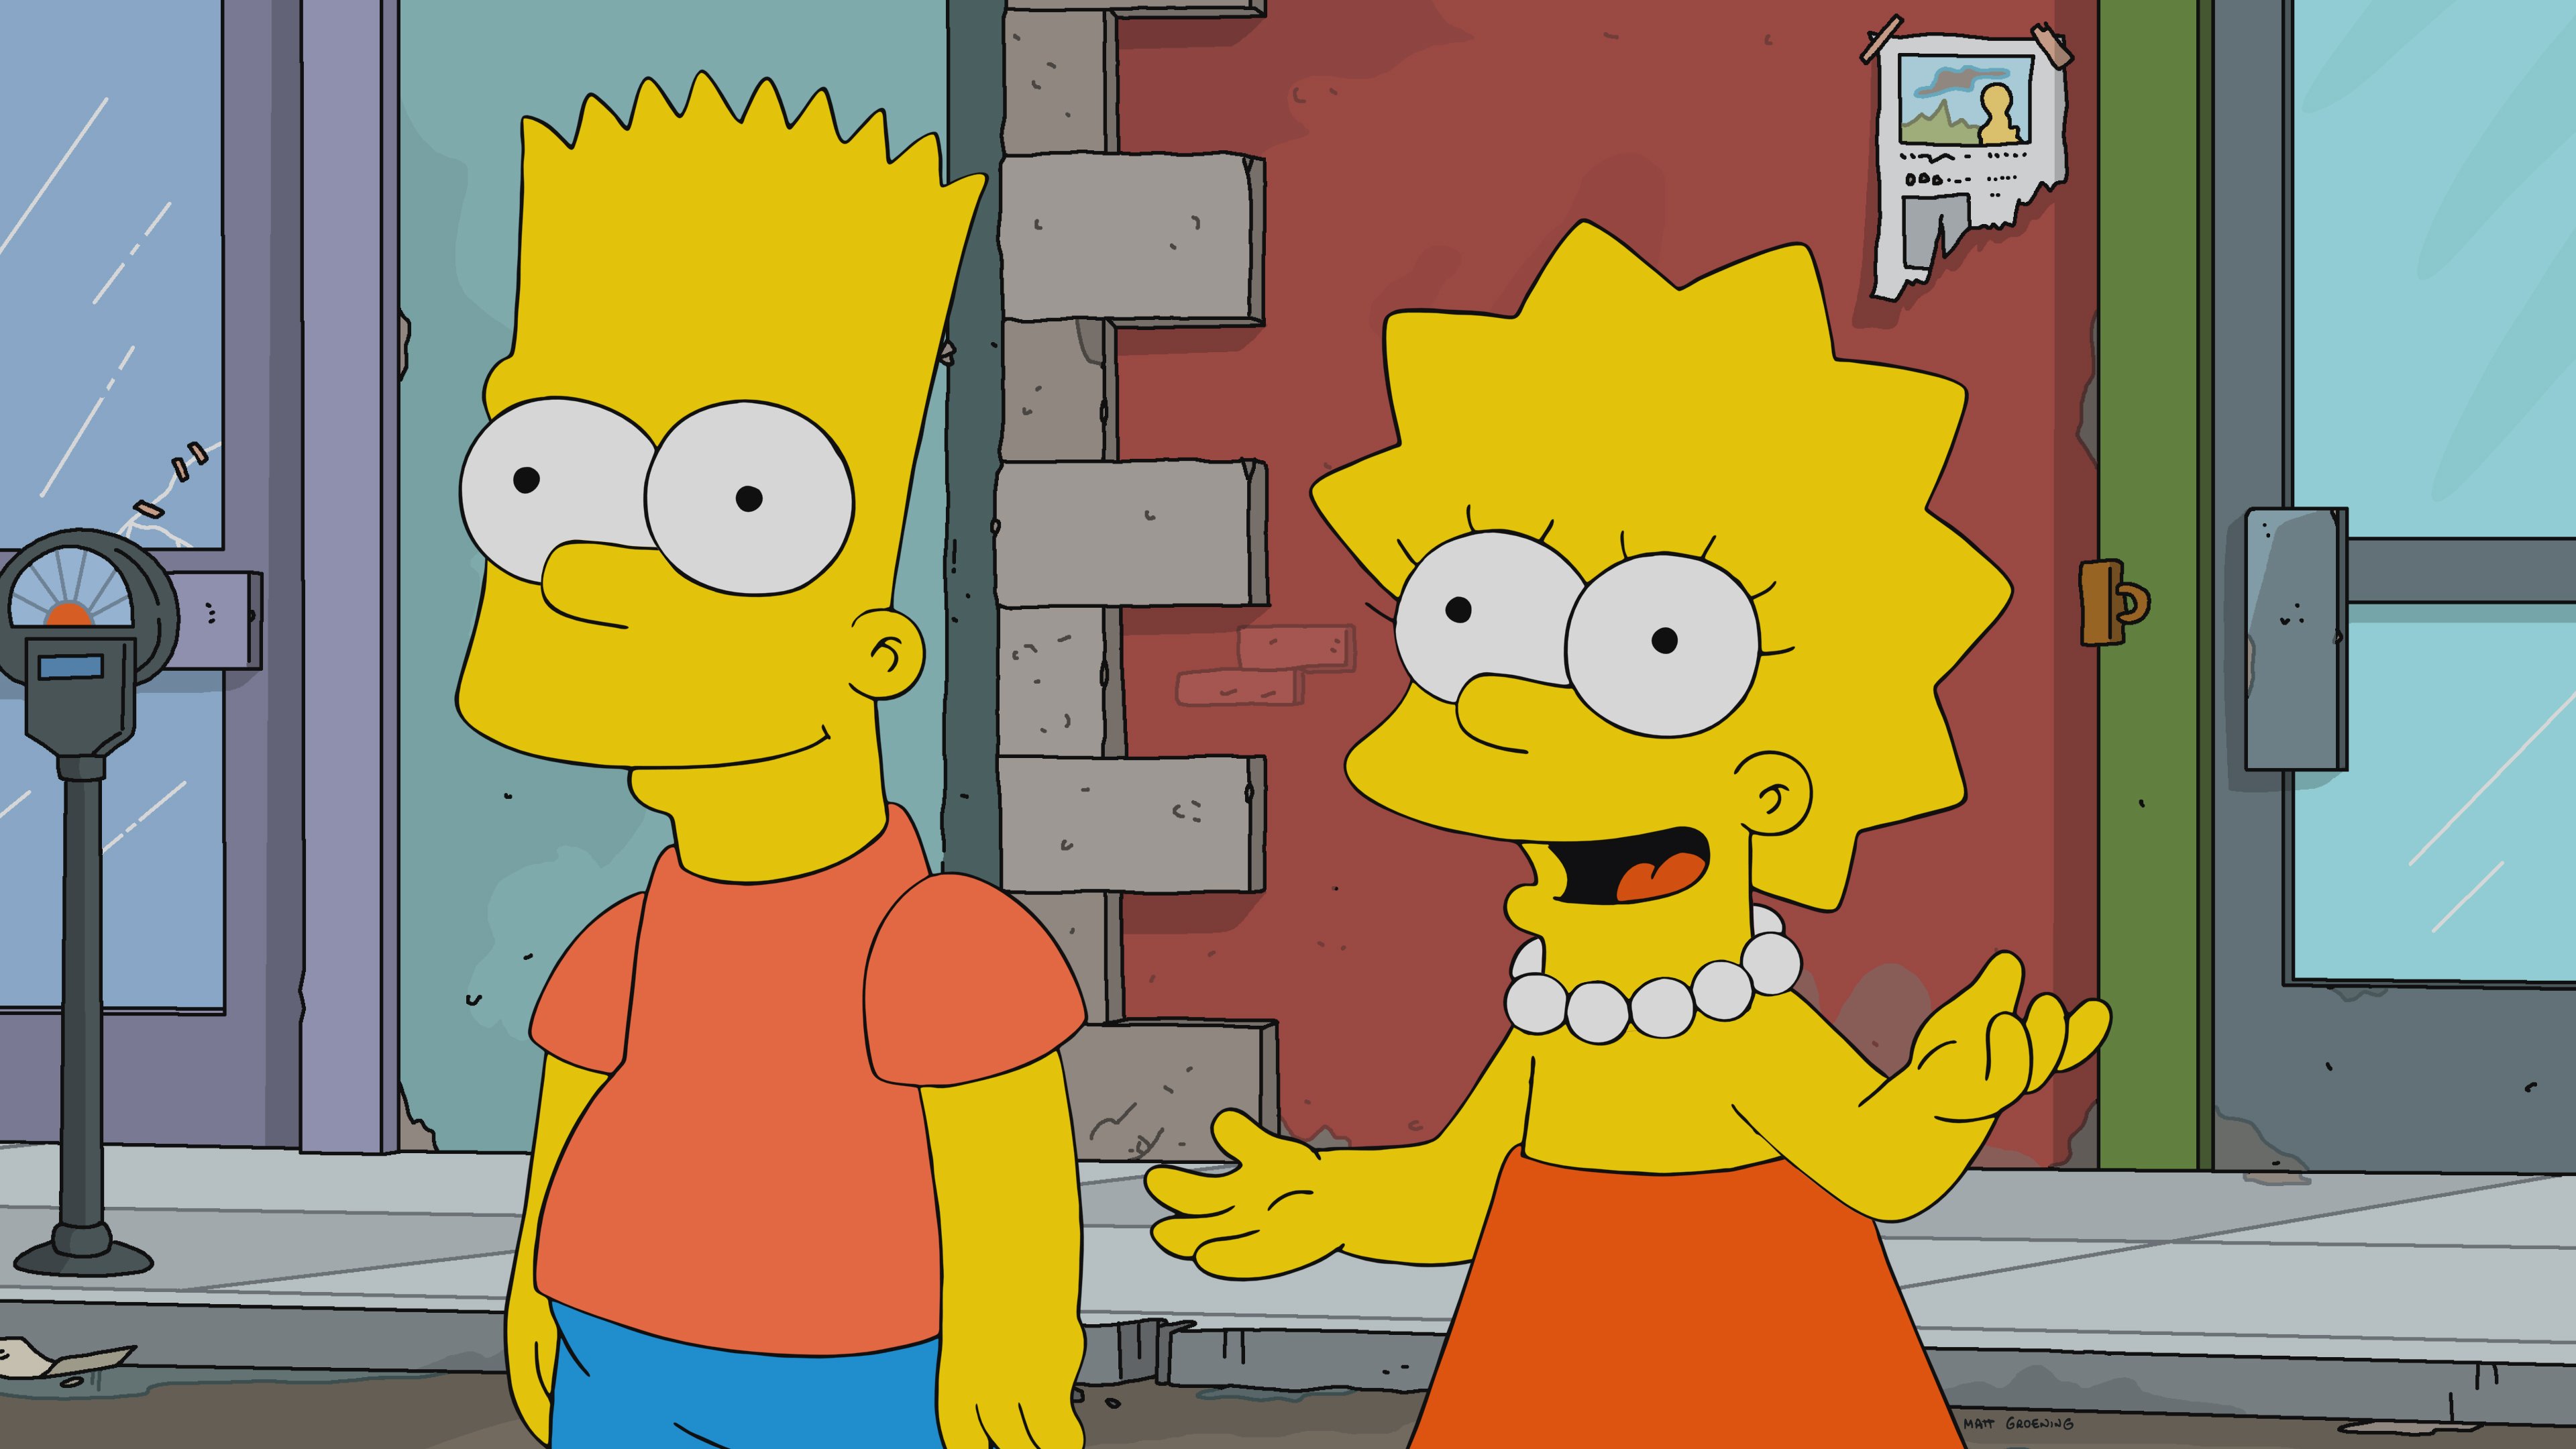 The Simpsons: Bart and Lisa on the street